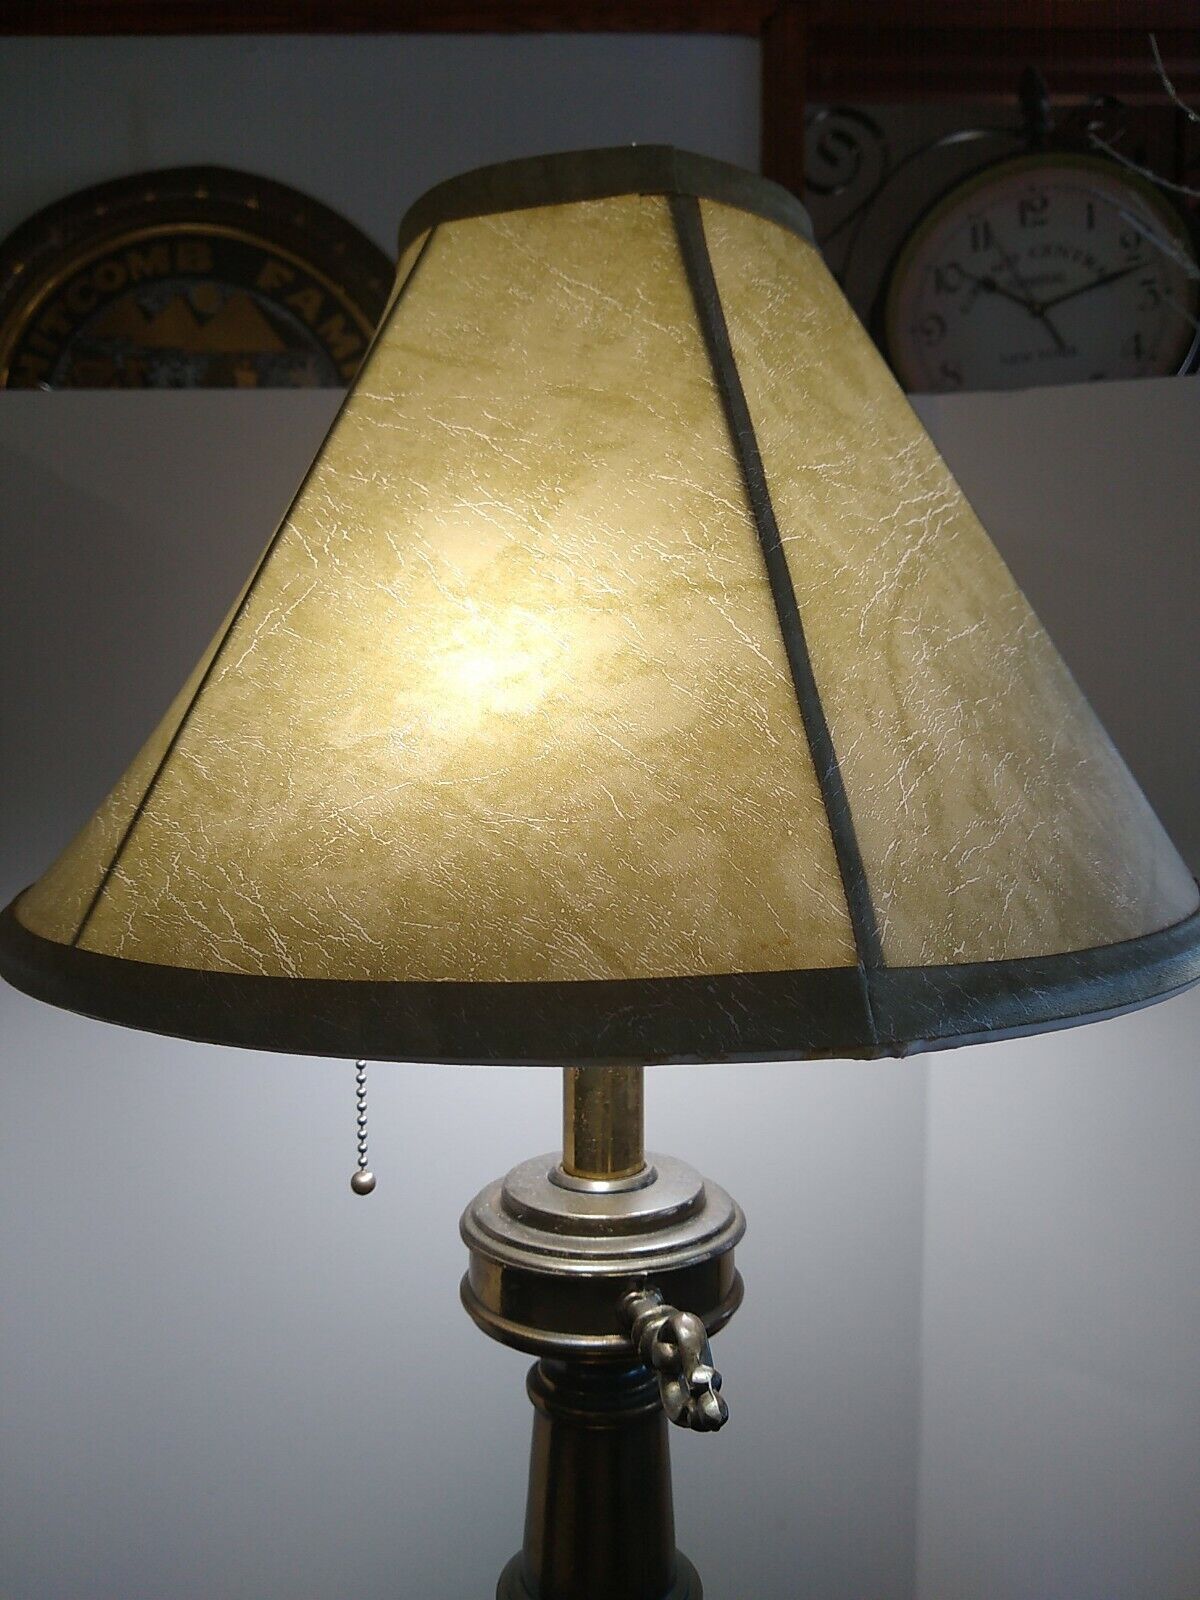 Vintage Royal Designs Inc Faux Leather Bell Lamp Shade Green Tone Lined